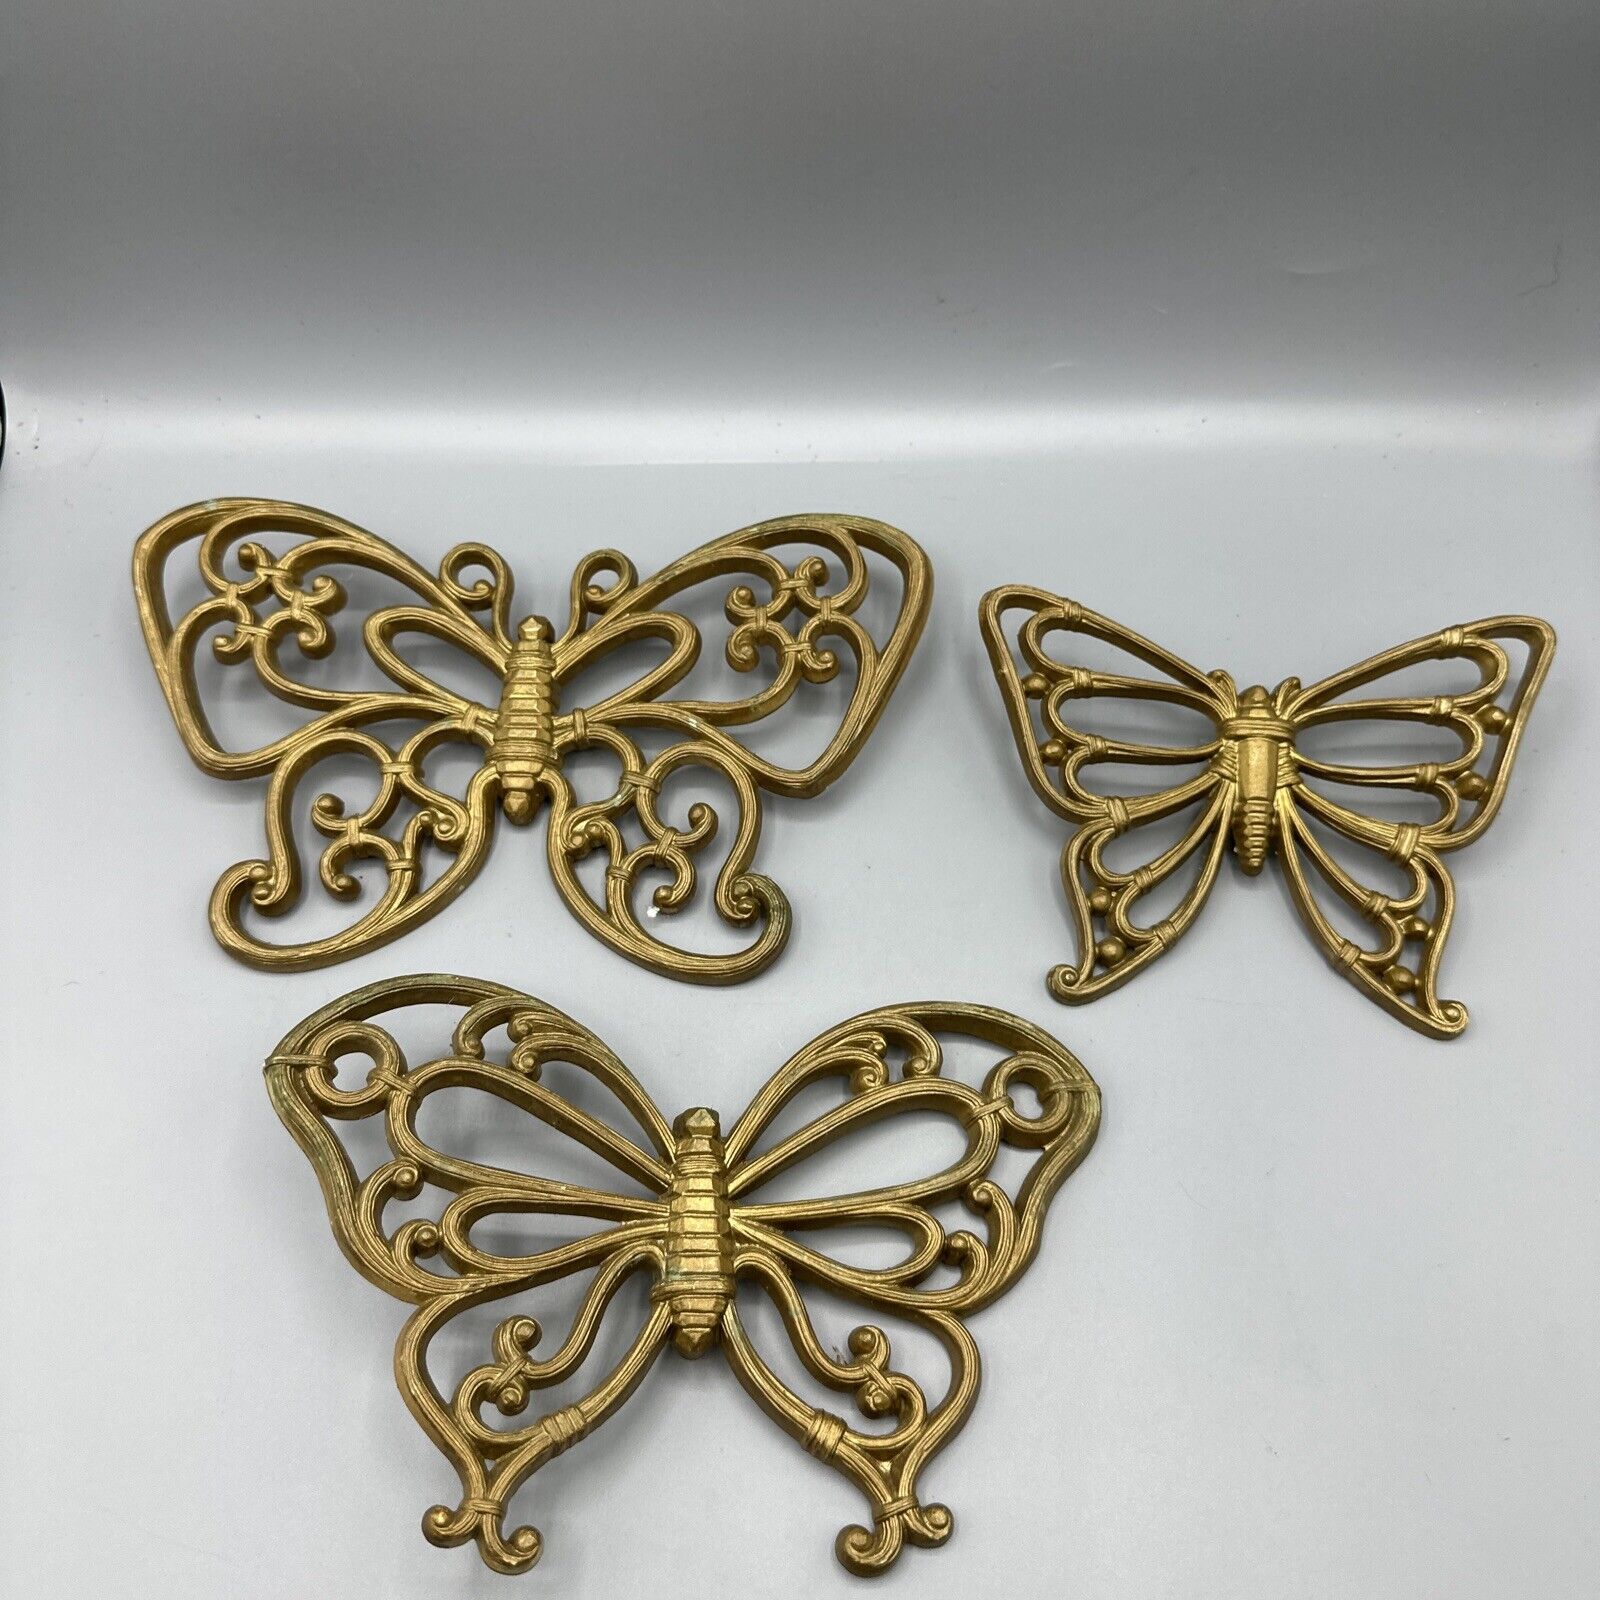 Vintage Homco Butterfly Faux Wood Wicker Wall Decor Gold 7537 Set of 3 1978